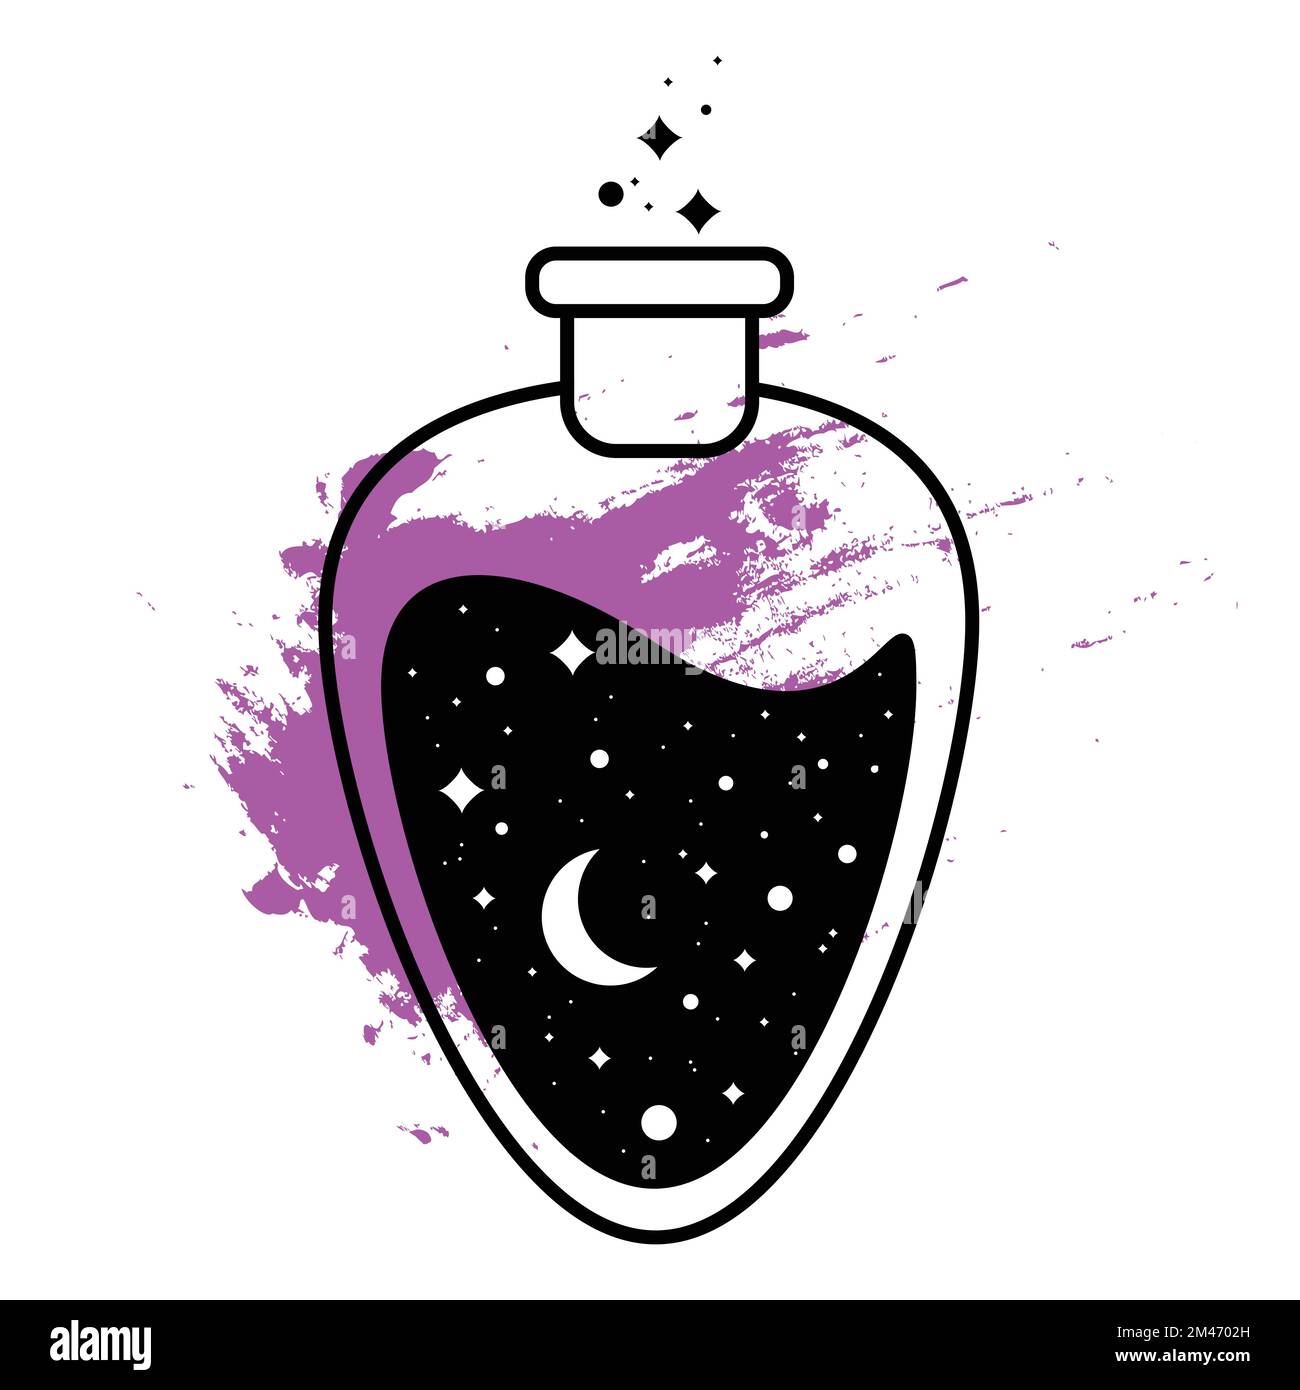 Space in a bottle. moon, stars, watercolor stain Stock Vector